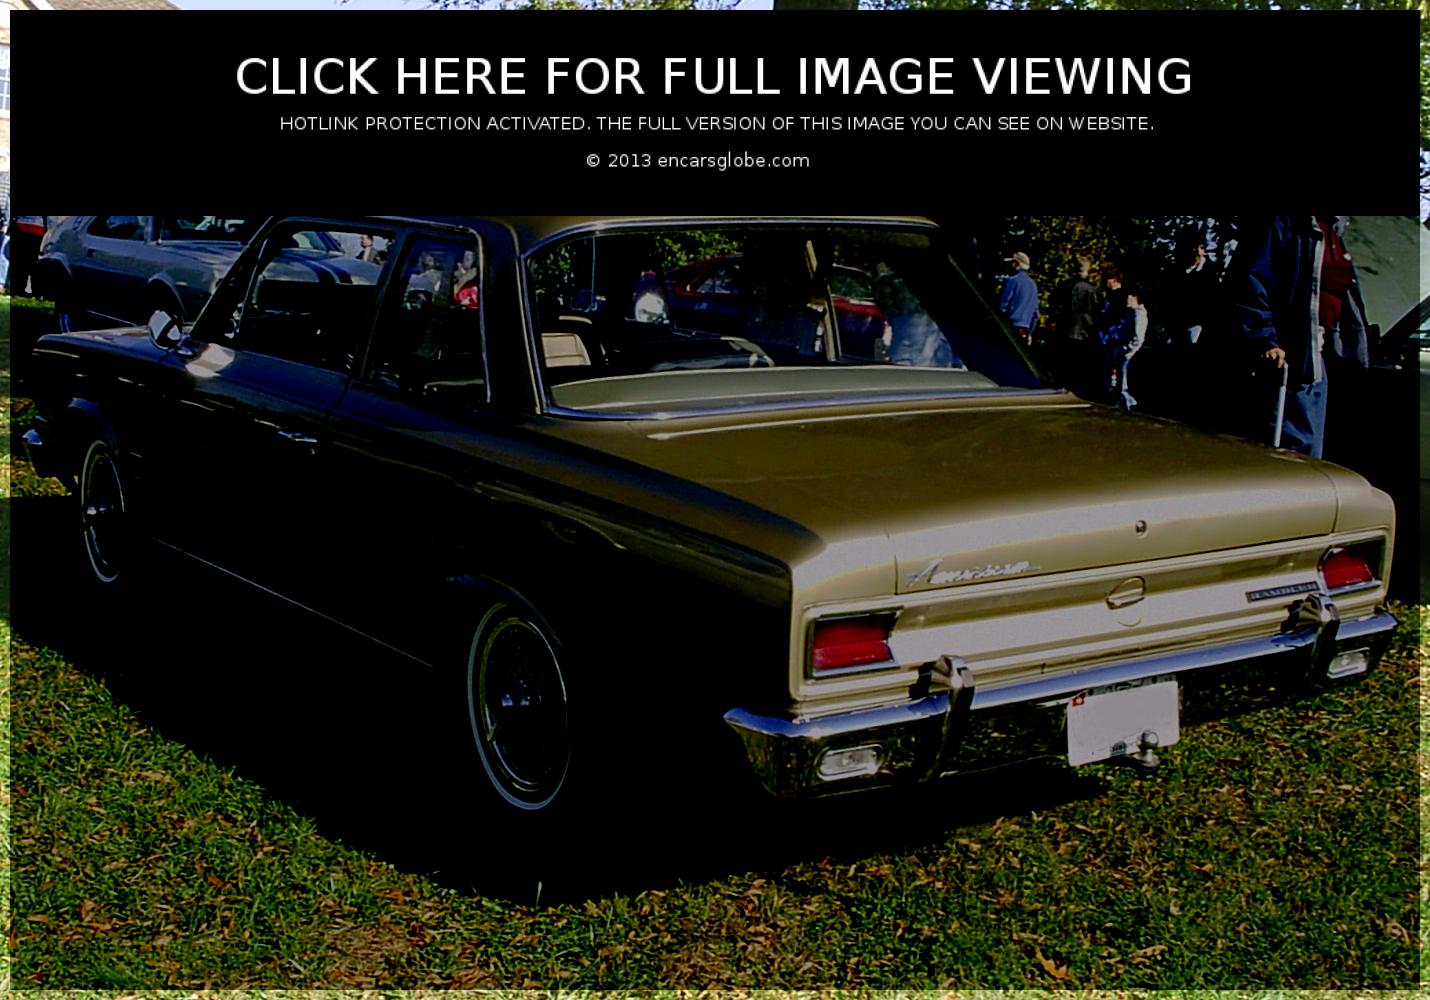 Rambler Super Six Photo Gallery: Photo #09 out of 7, Image Size ...